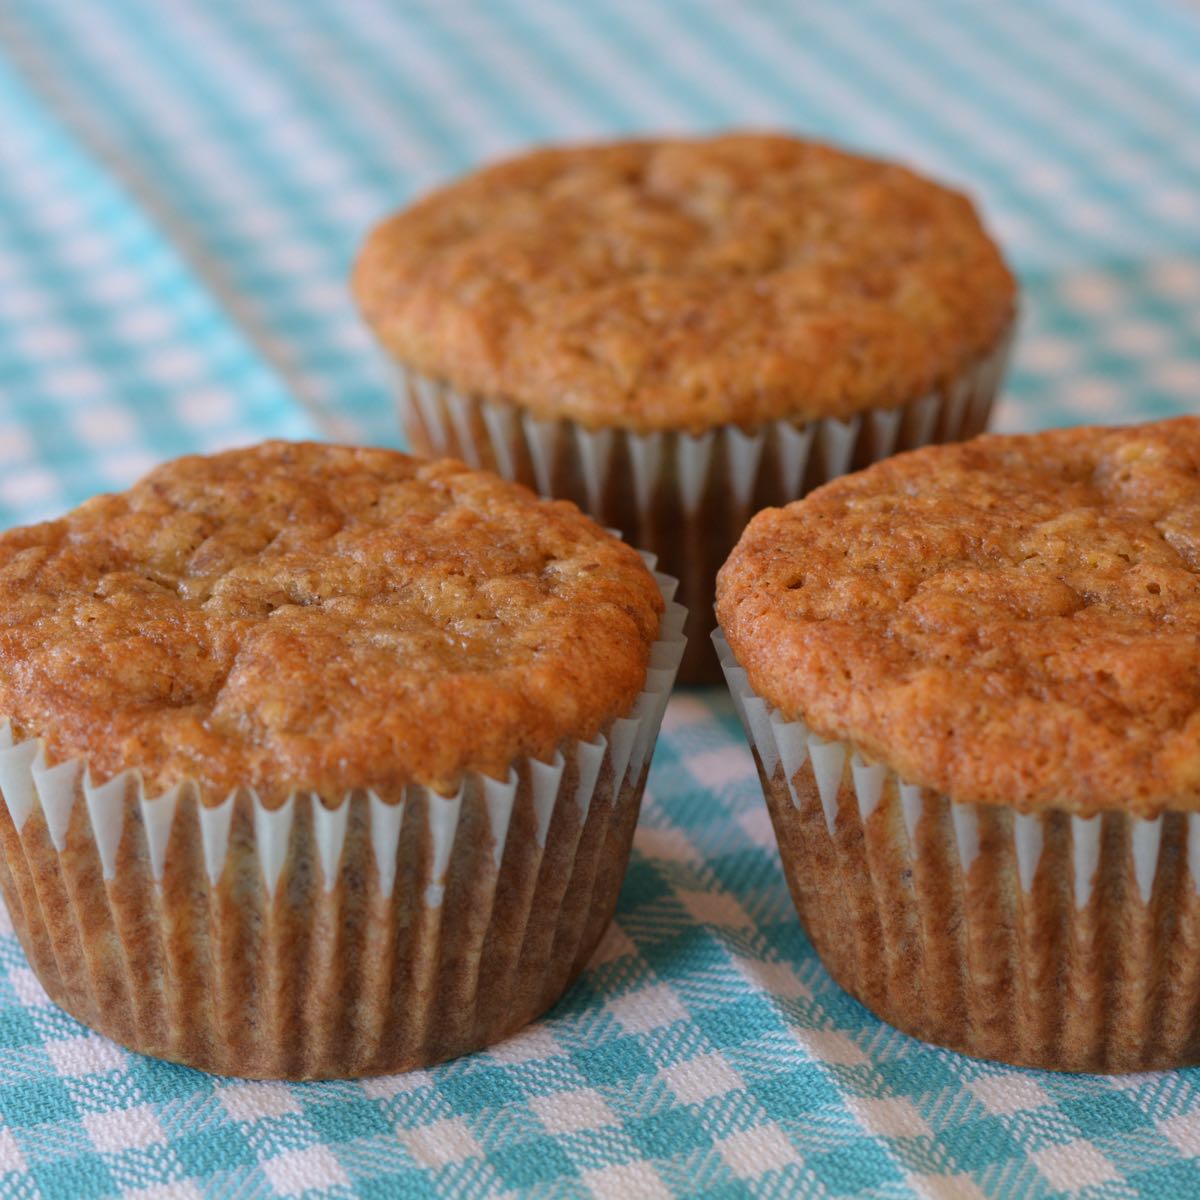 Three gluten free Banana Muffins resting on a turquoise tea towel.